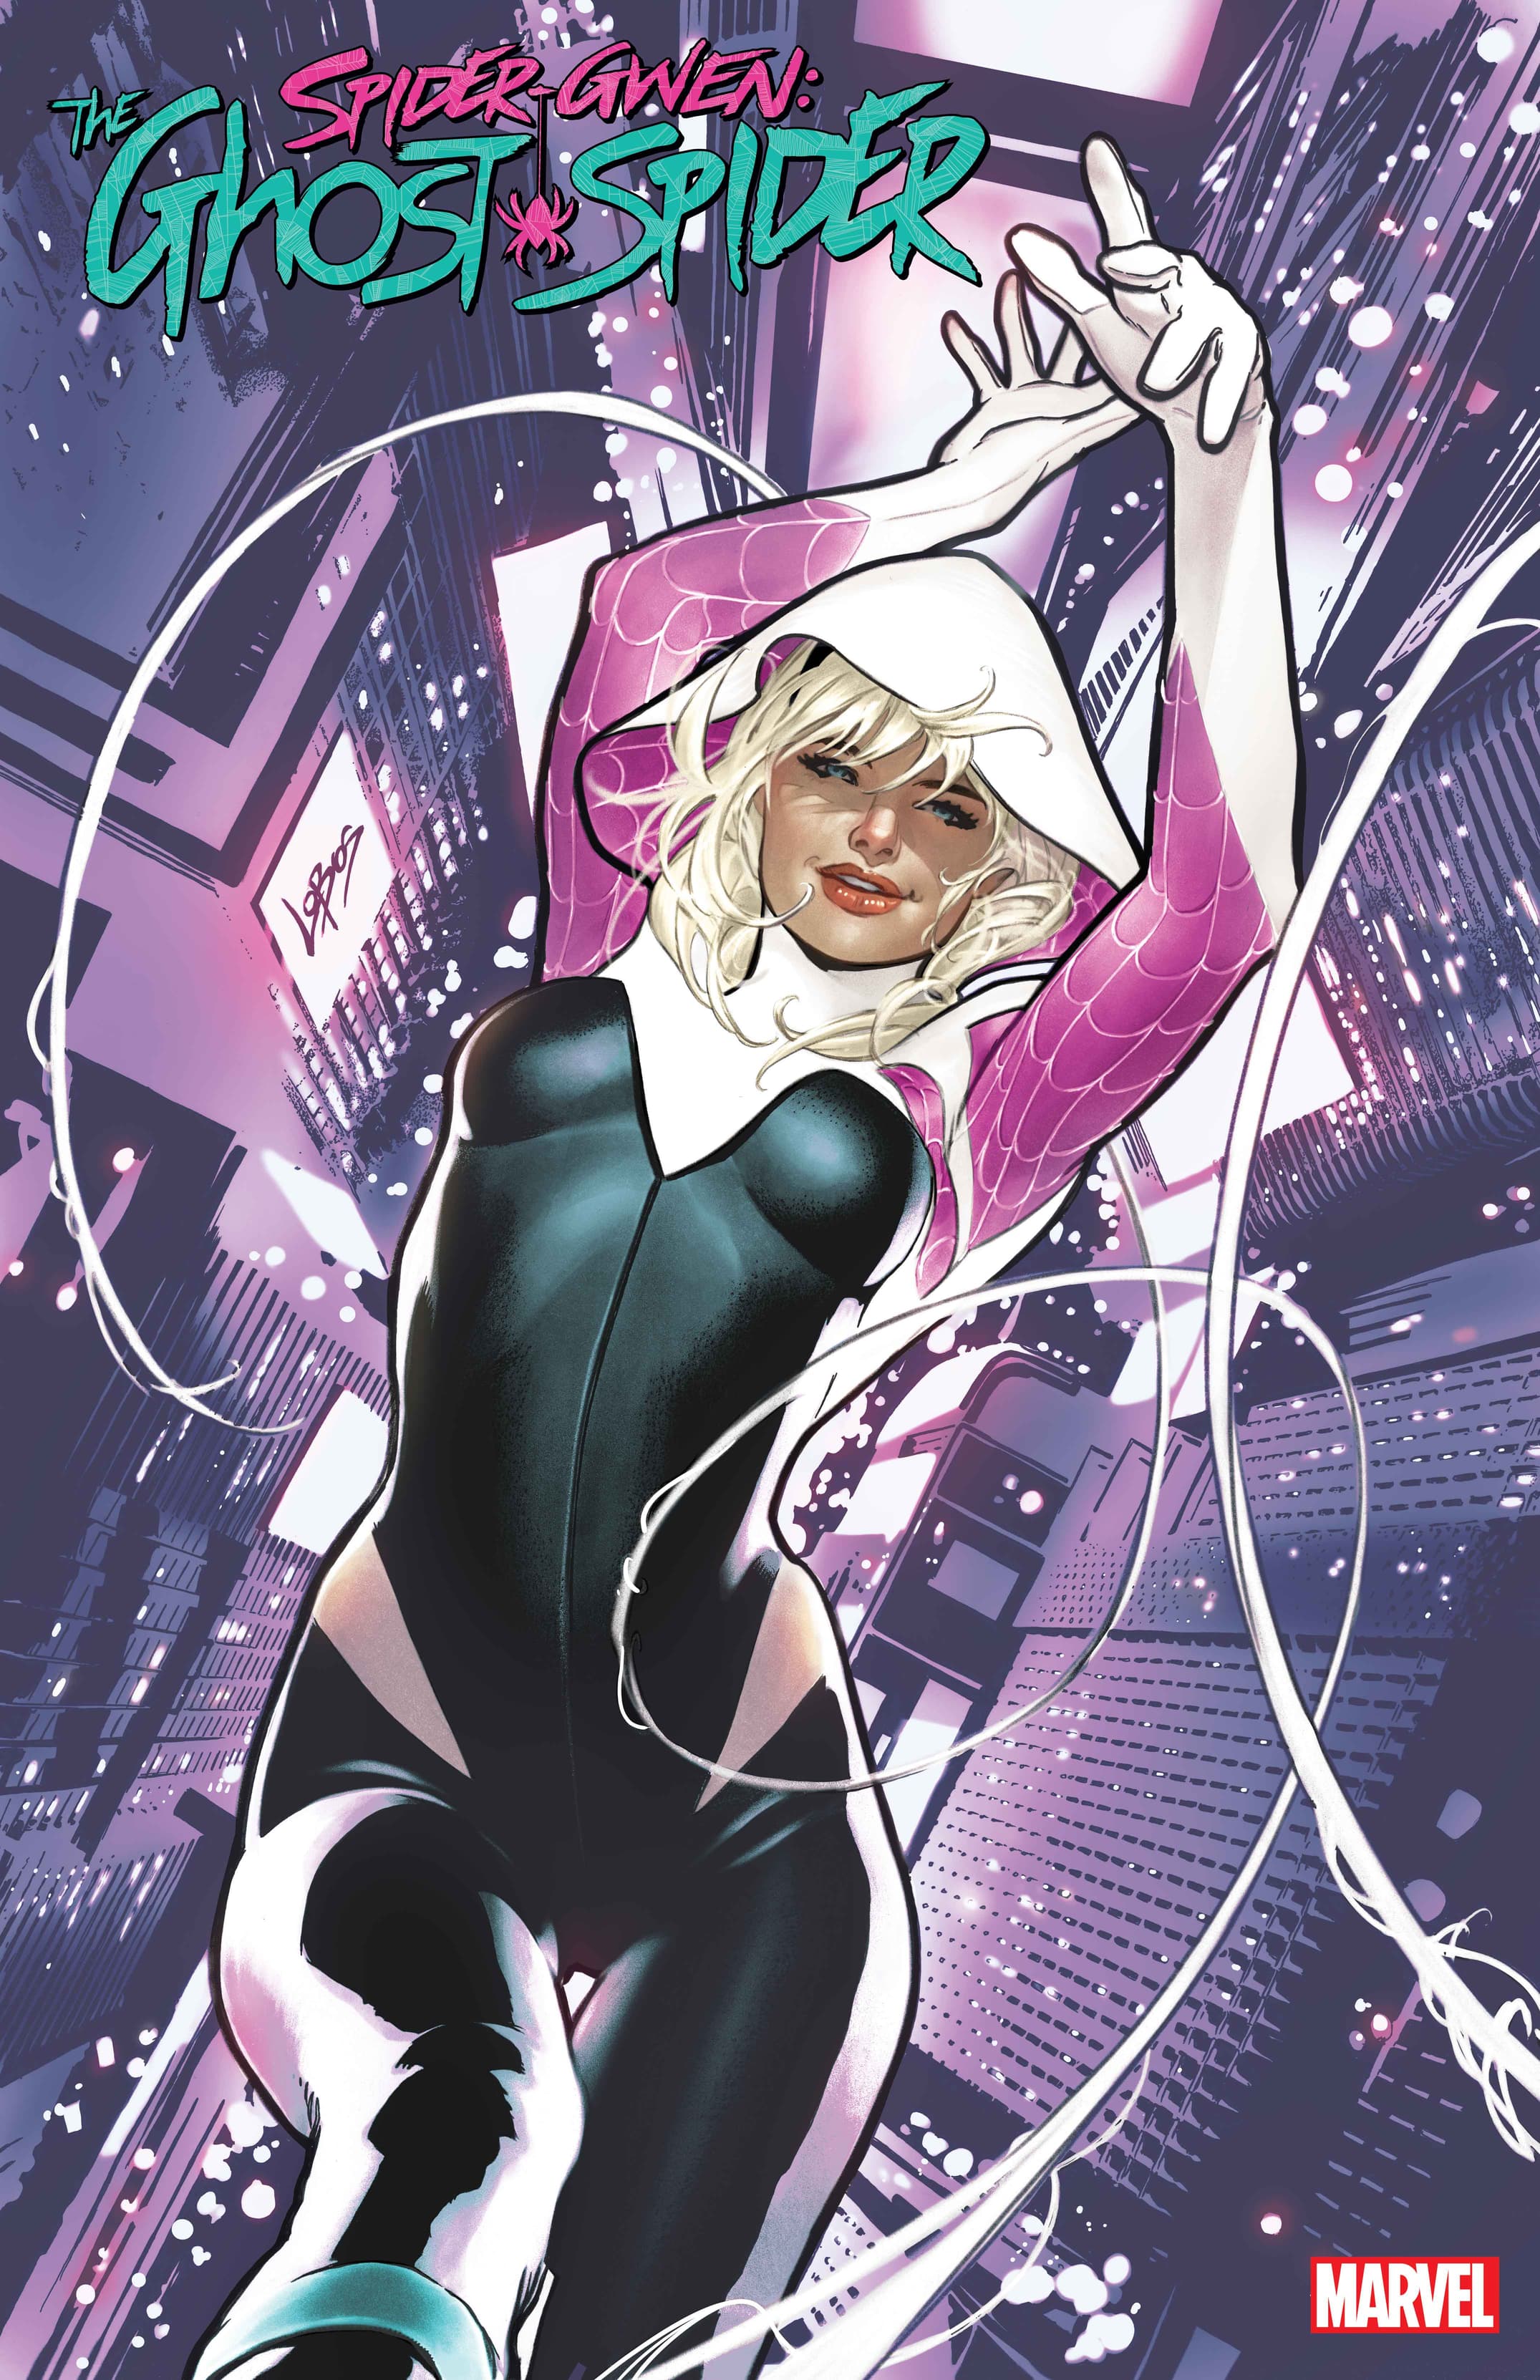 SPIDER-GWEN: THE GHOST-SPIDER #1 variant cover by Pablo Villalobos